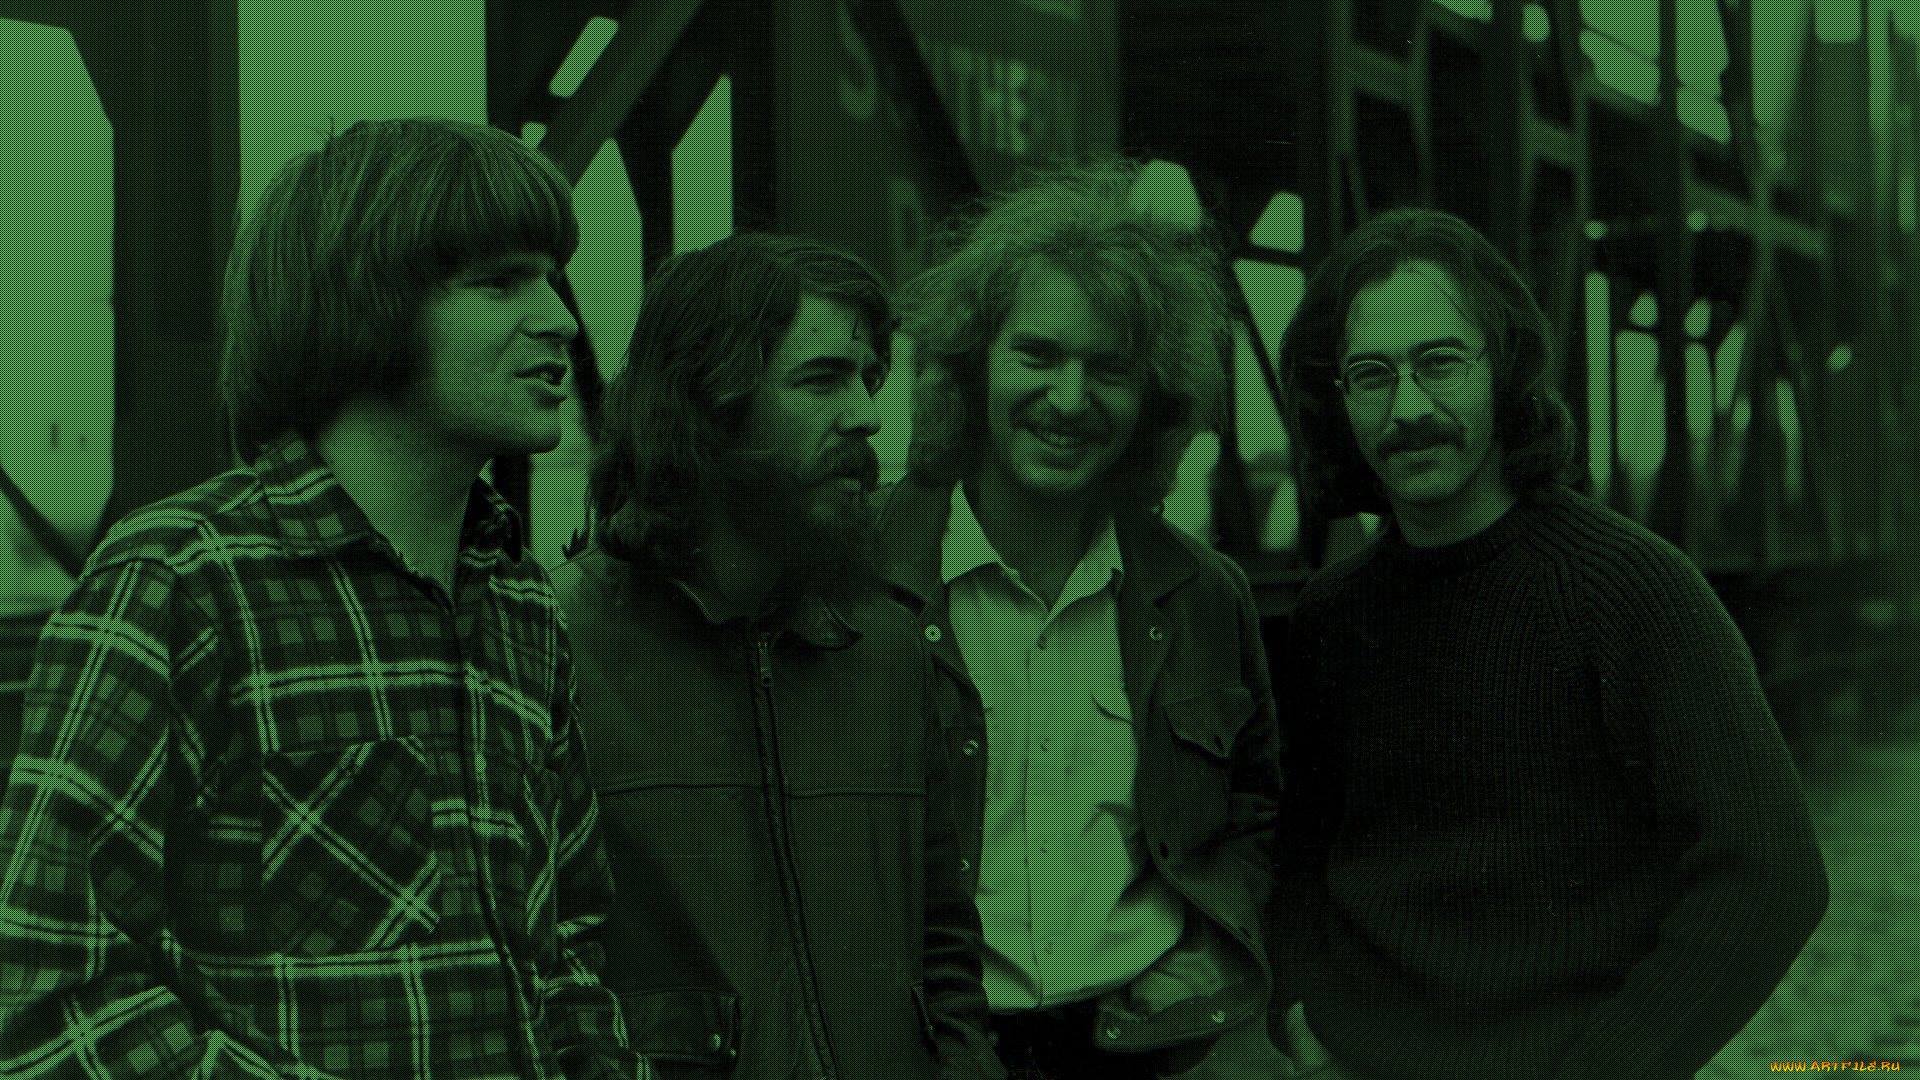 creedence-clearwater-revival, музыка, creedence, clearwater, revival, группа